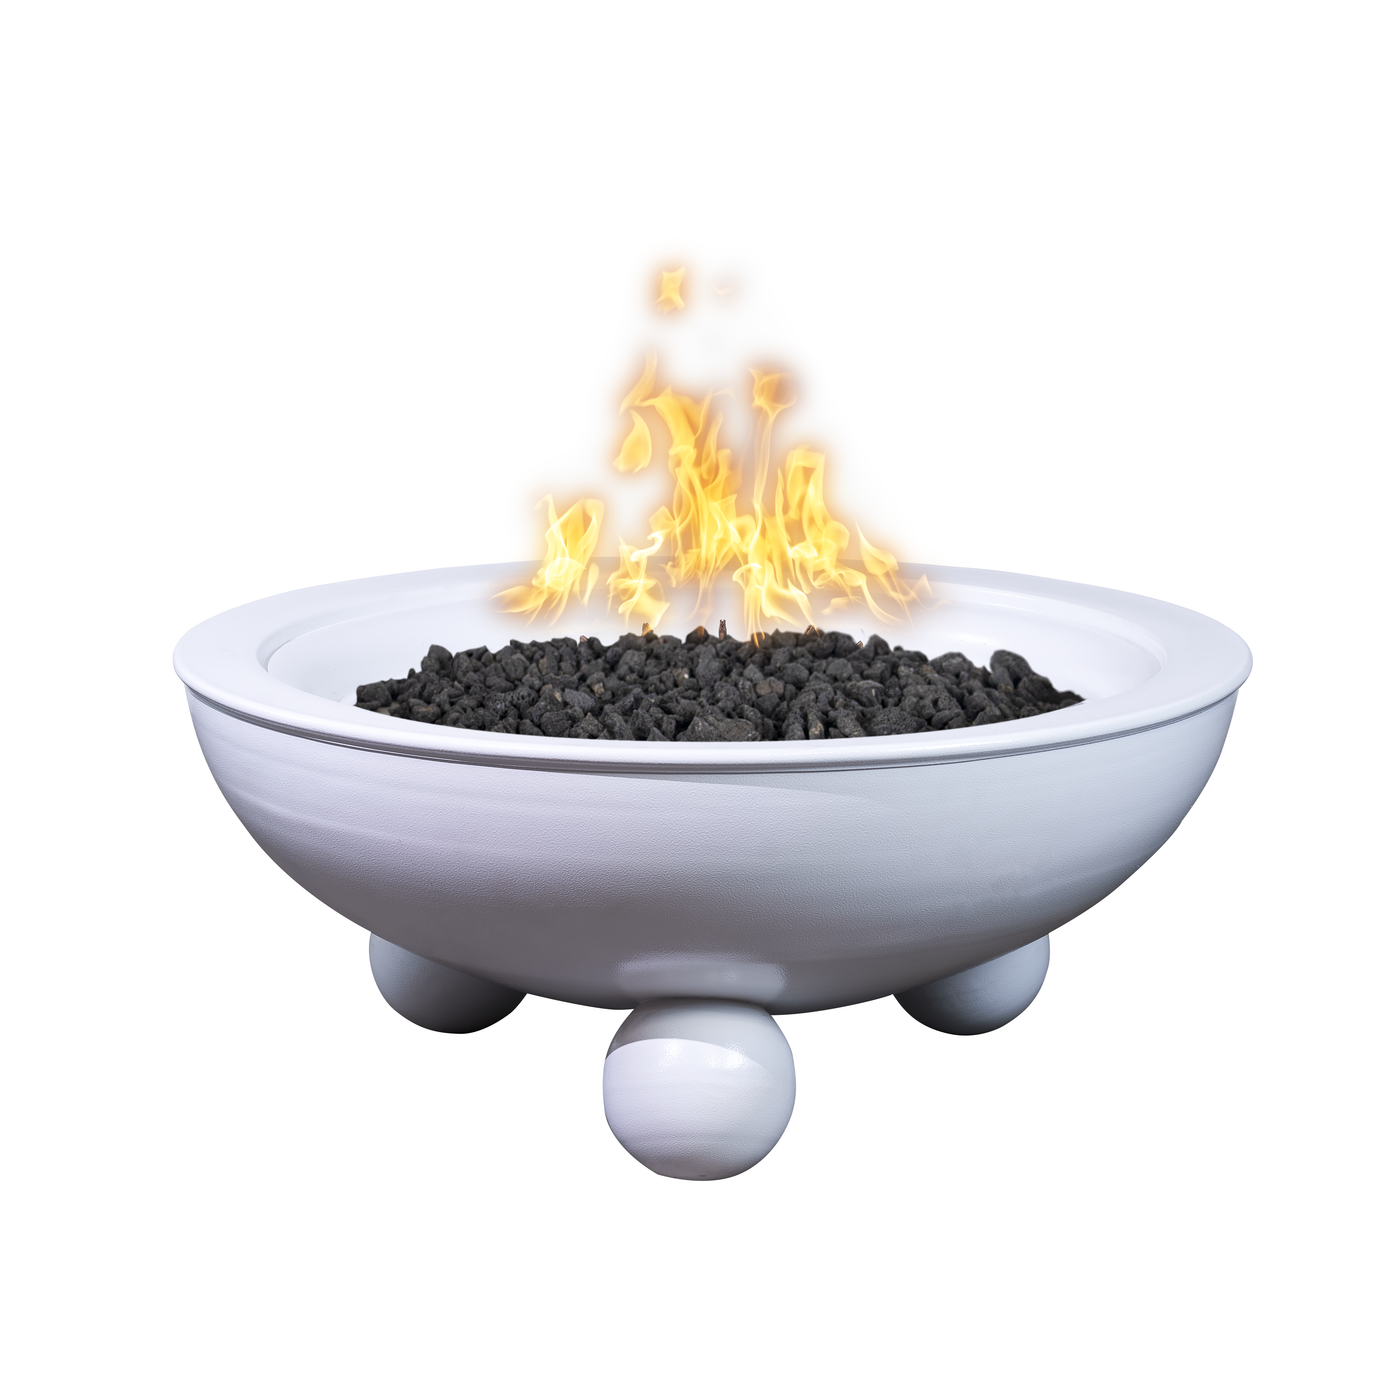 Sedona Powder Coated Fire Bowl with Legs